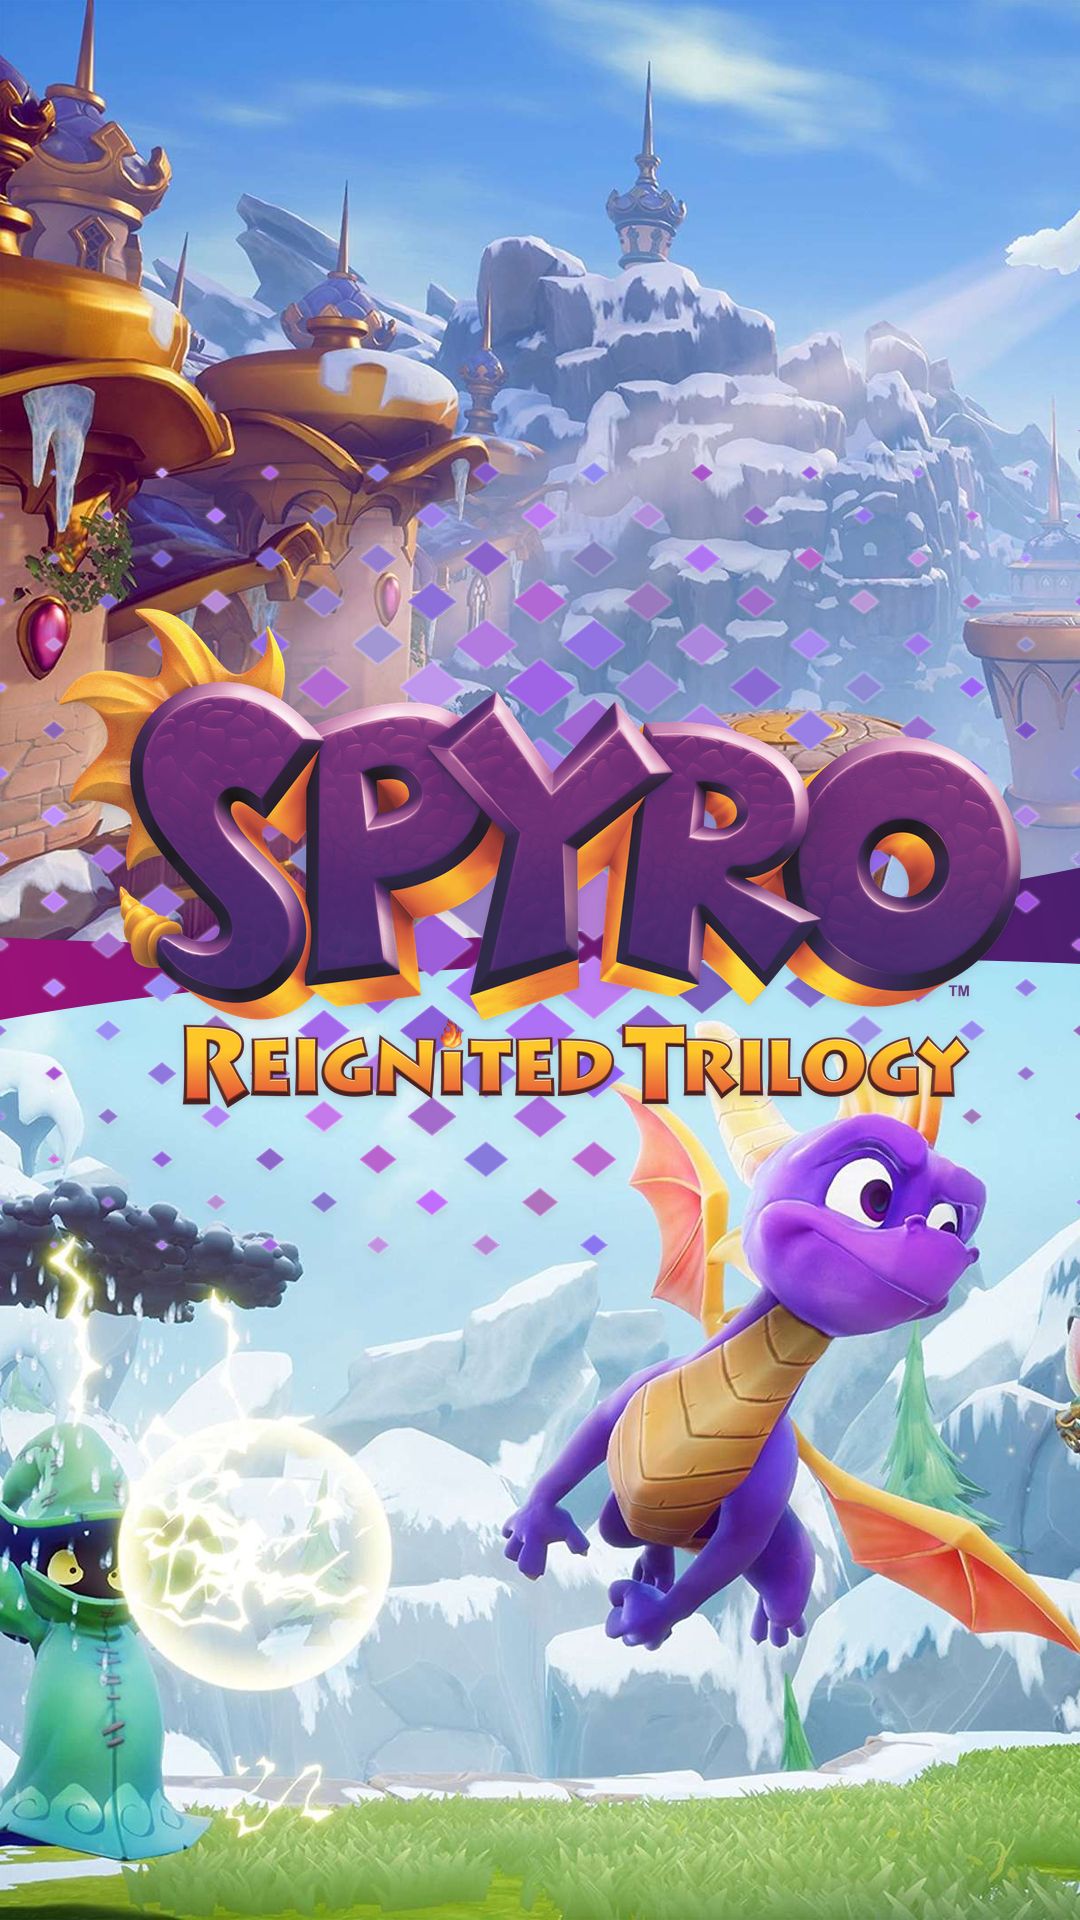 Hd Wallpaper Pictures - Spyro Remastered Release Date , HD Wallpaper & Backgrounds